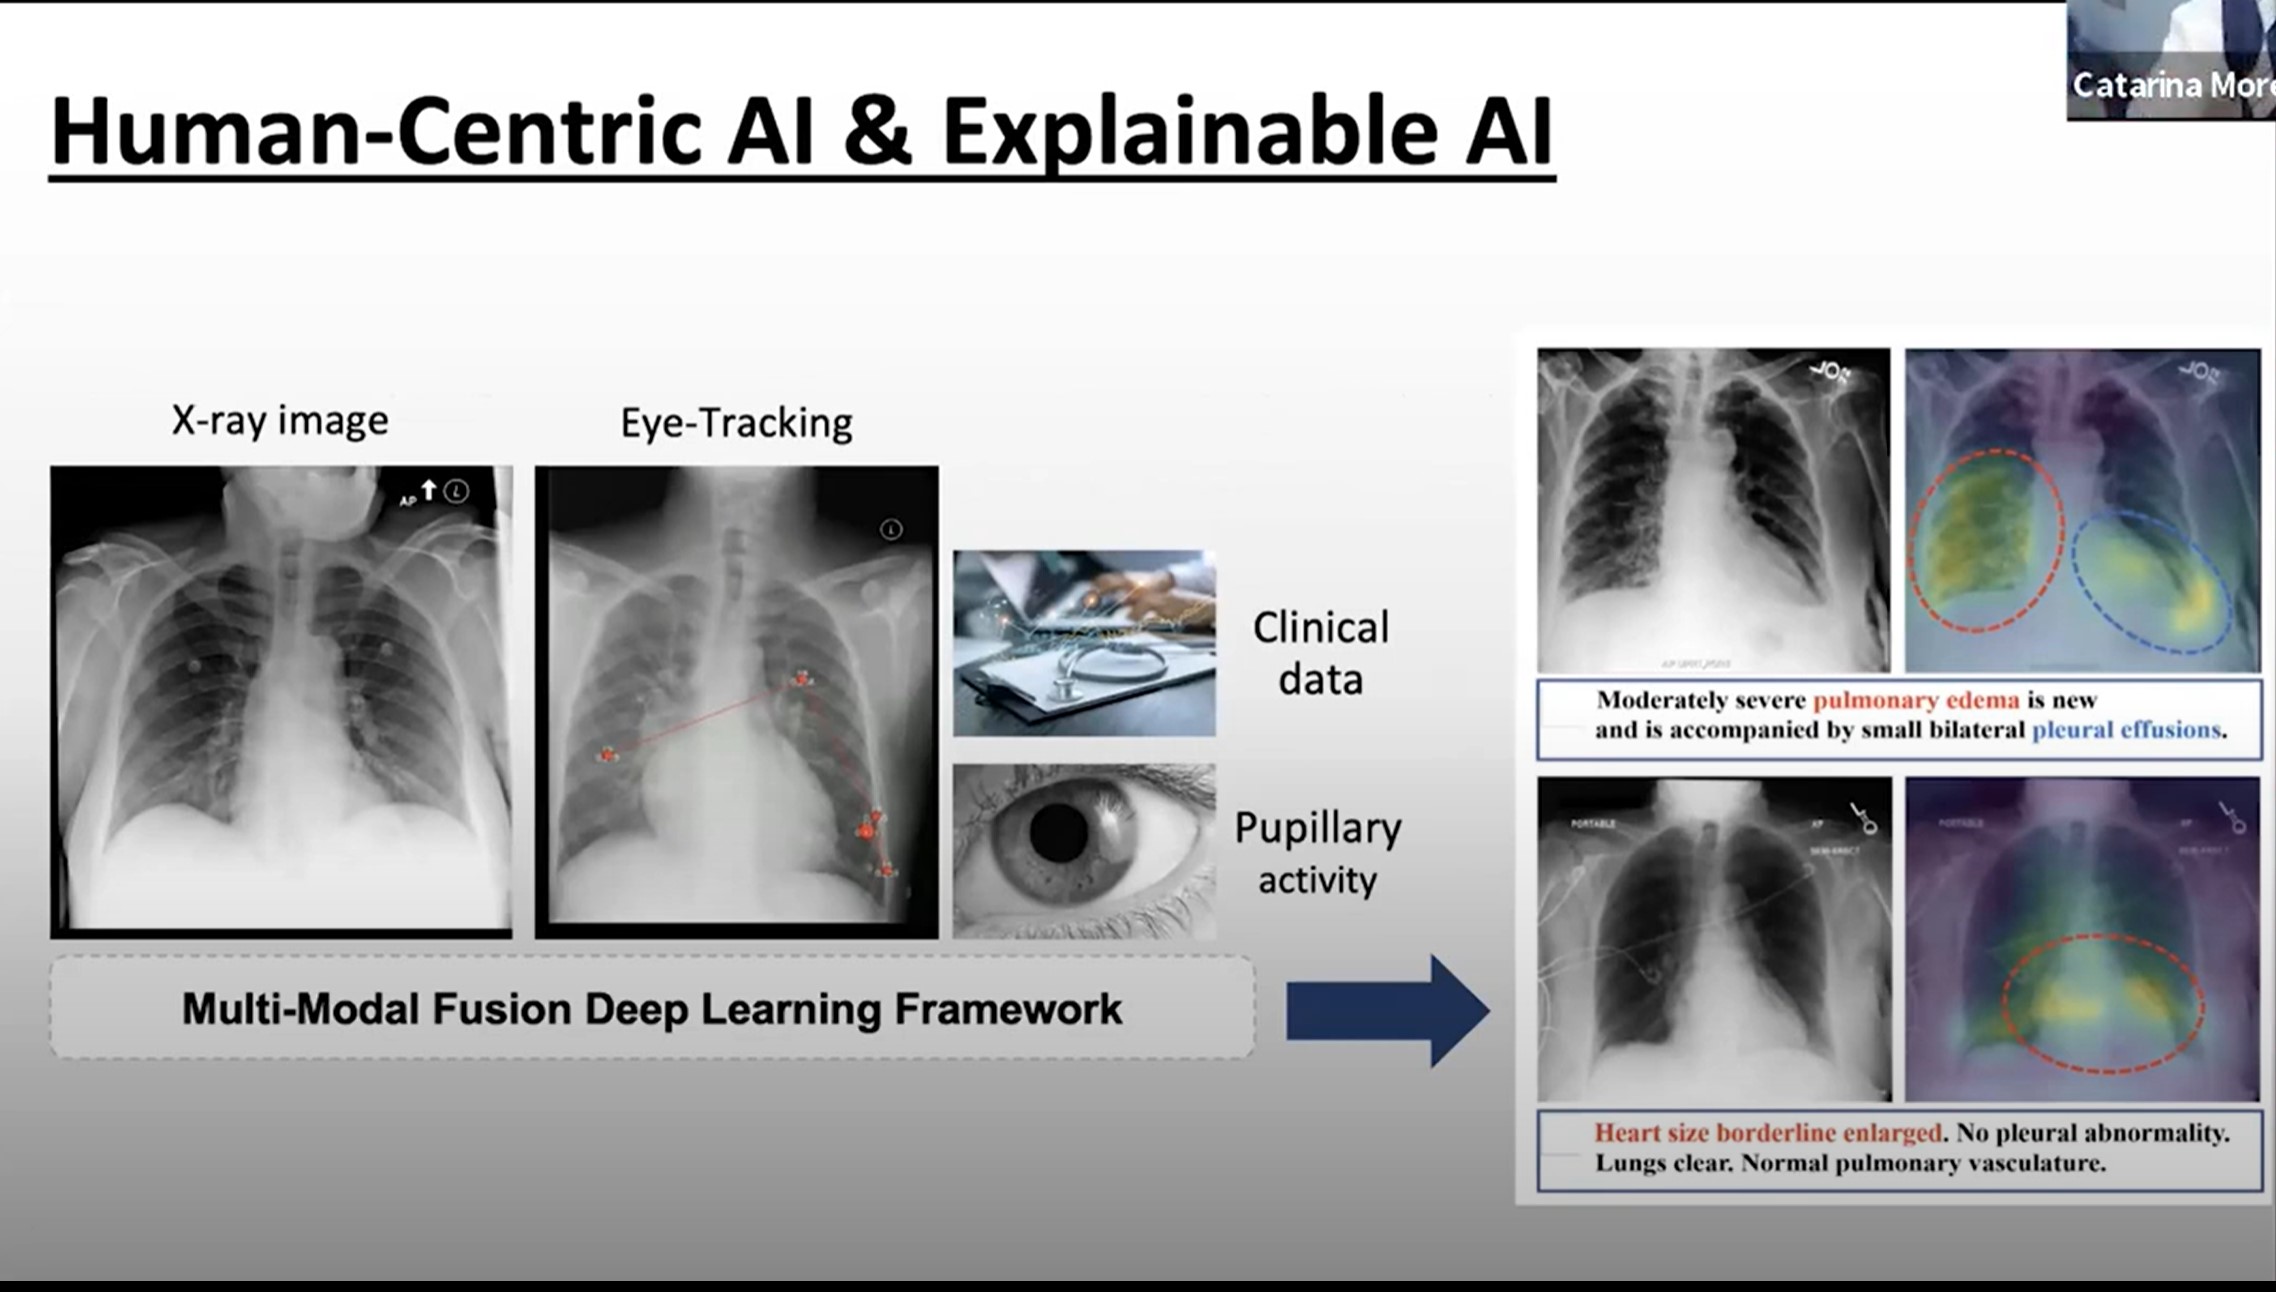 Using a multi-modal approach for machine learning on chest x-rays